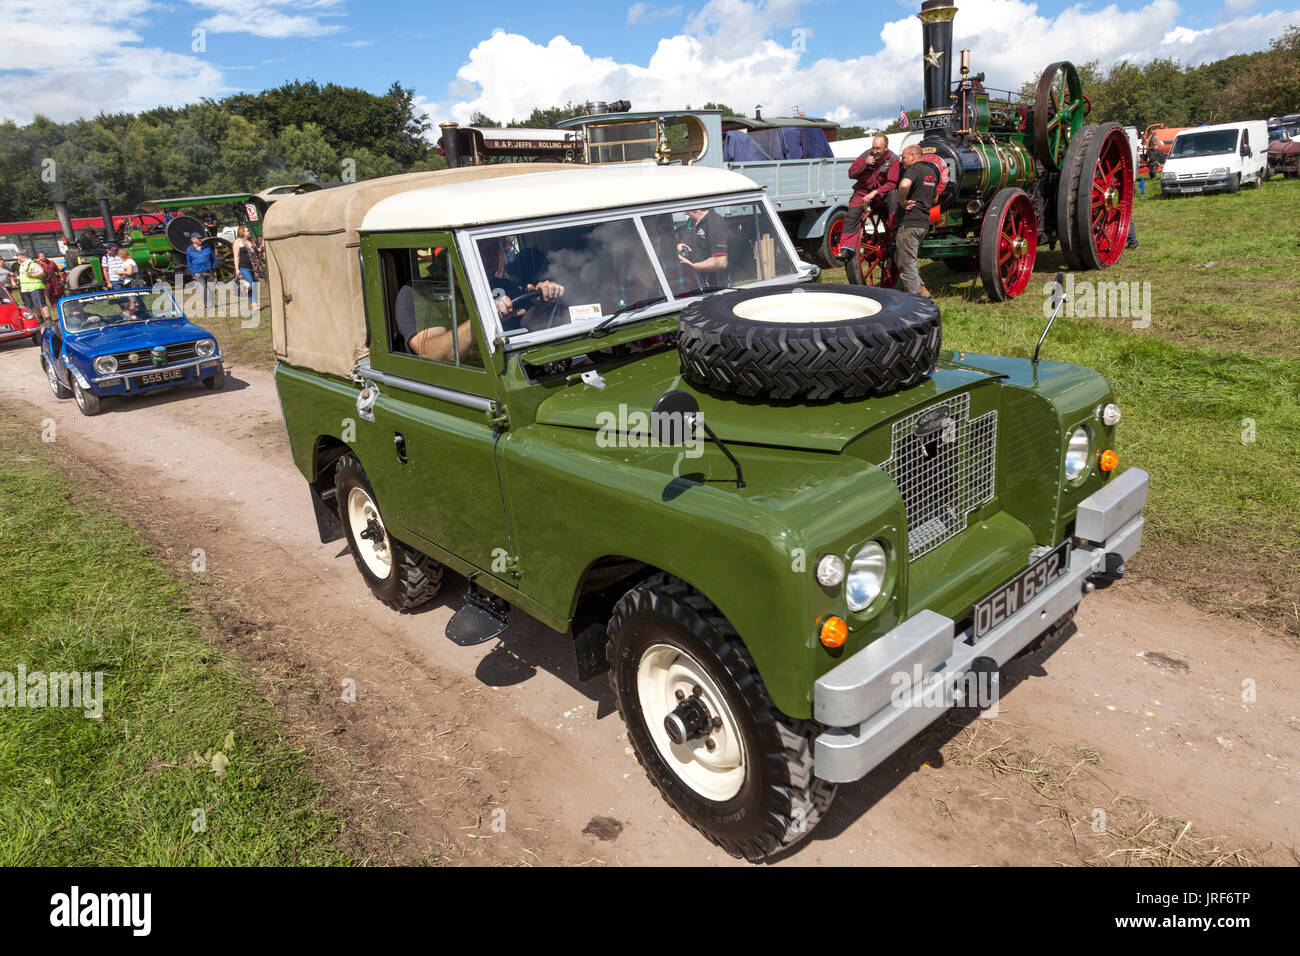 Brackenfield, Derbyshire, UK. 5th August 2017. A classic 1971 restored Land Rover arriving at the 47th Cromford Steam rally. The annual event is popular with enthusiasts of steam traction engines, vintage lorries, tractors and motor vehicles. Credit: Mark Richardson/Alamy Live News Stock Photo